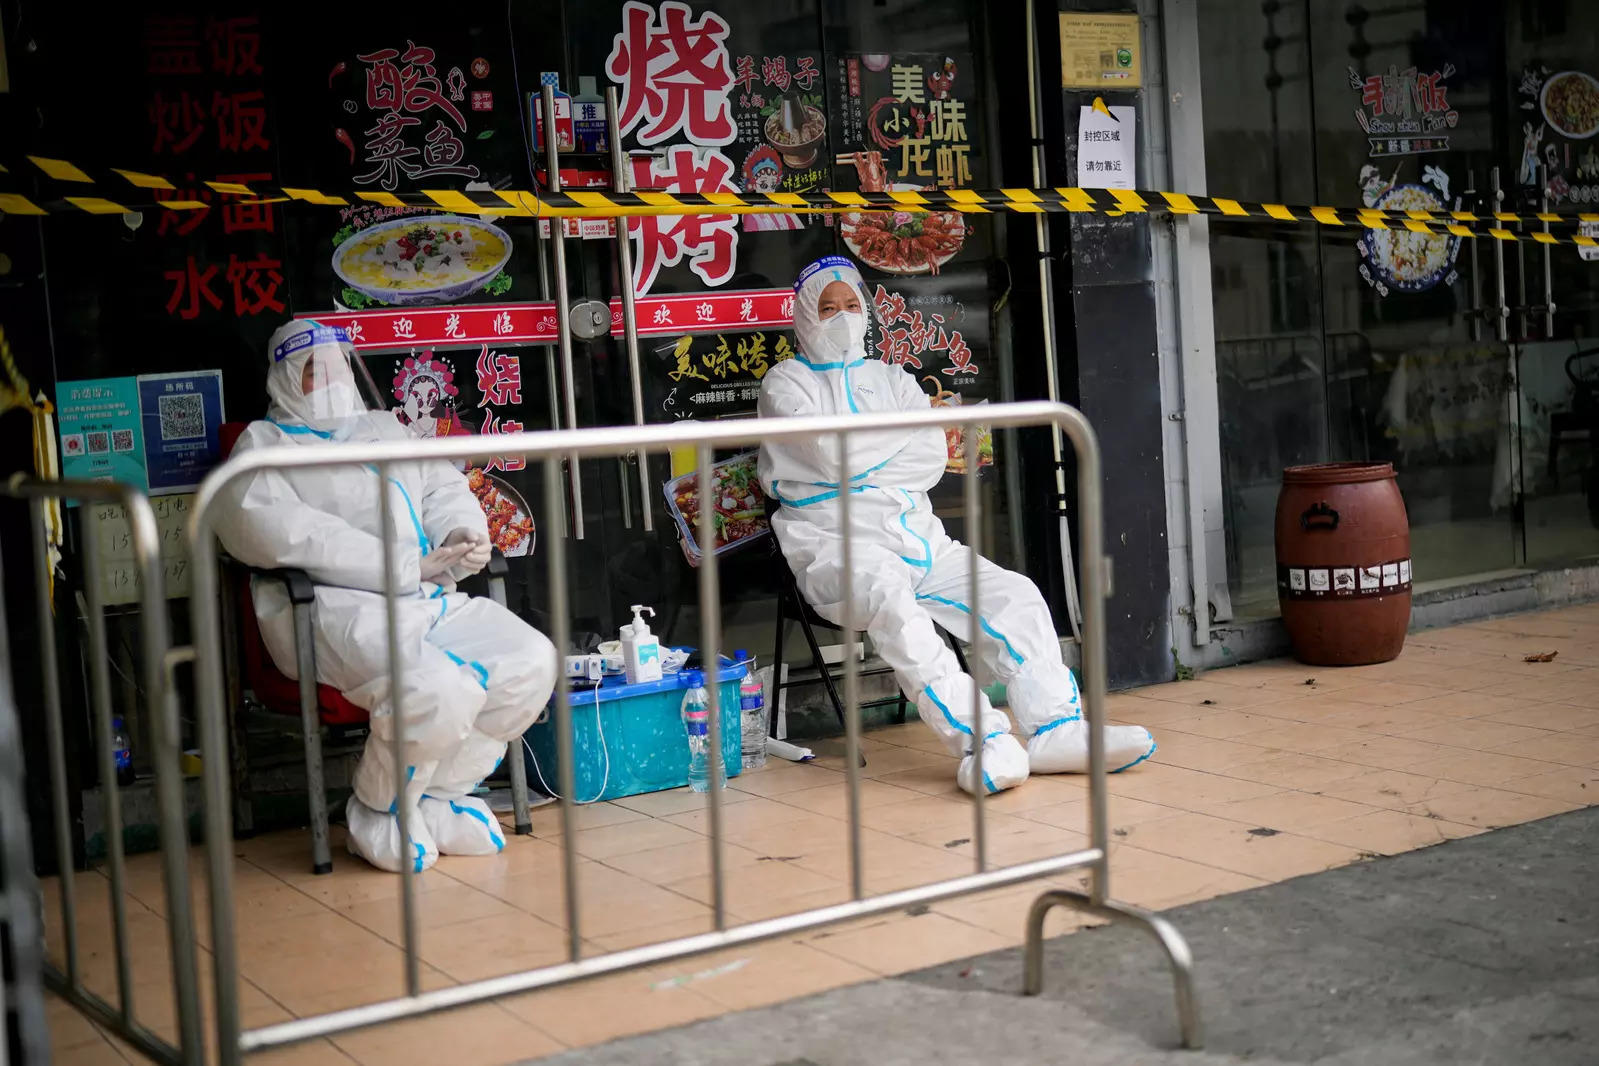 Workers in protective suits keep watch behind a barrier at a sealed restaurant area, following the coronavirus disease  outbreak in Shanghai, China 